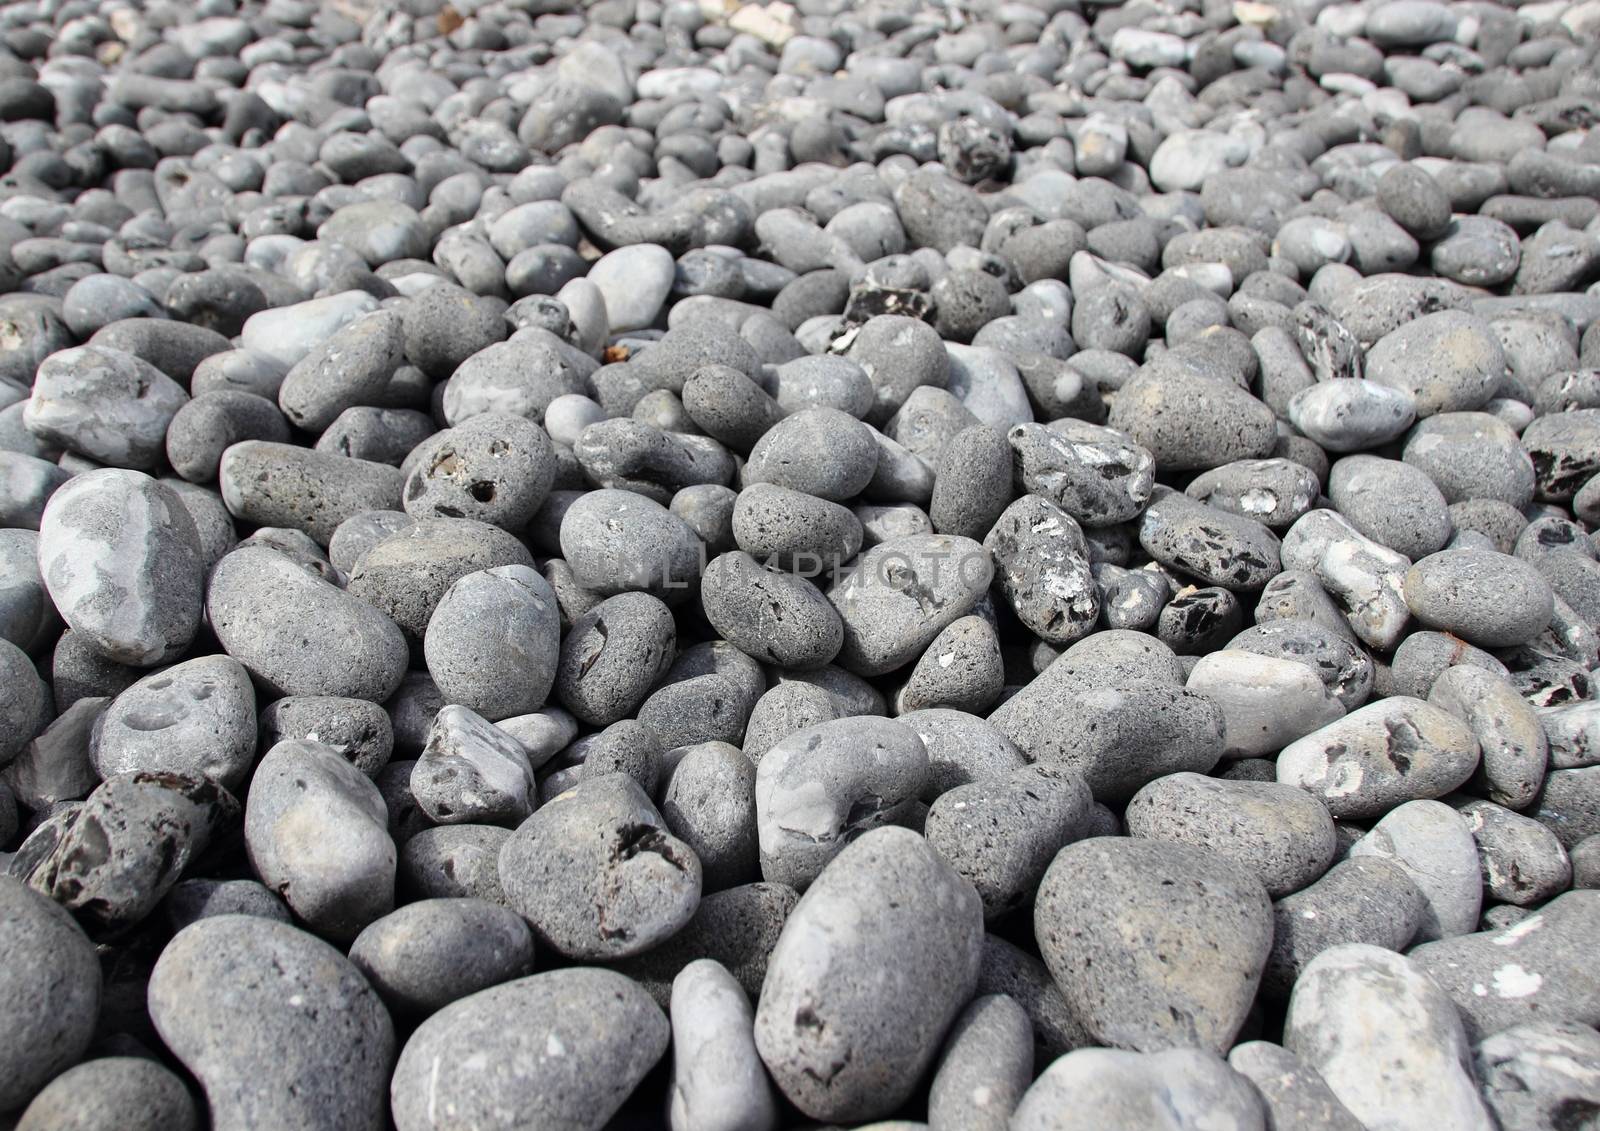 Rubble Beach Stones with Endless Perspective Background by HoleInTheBox